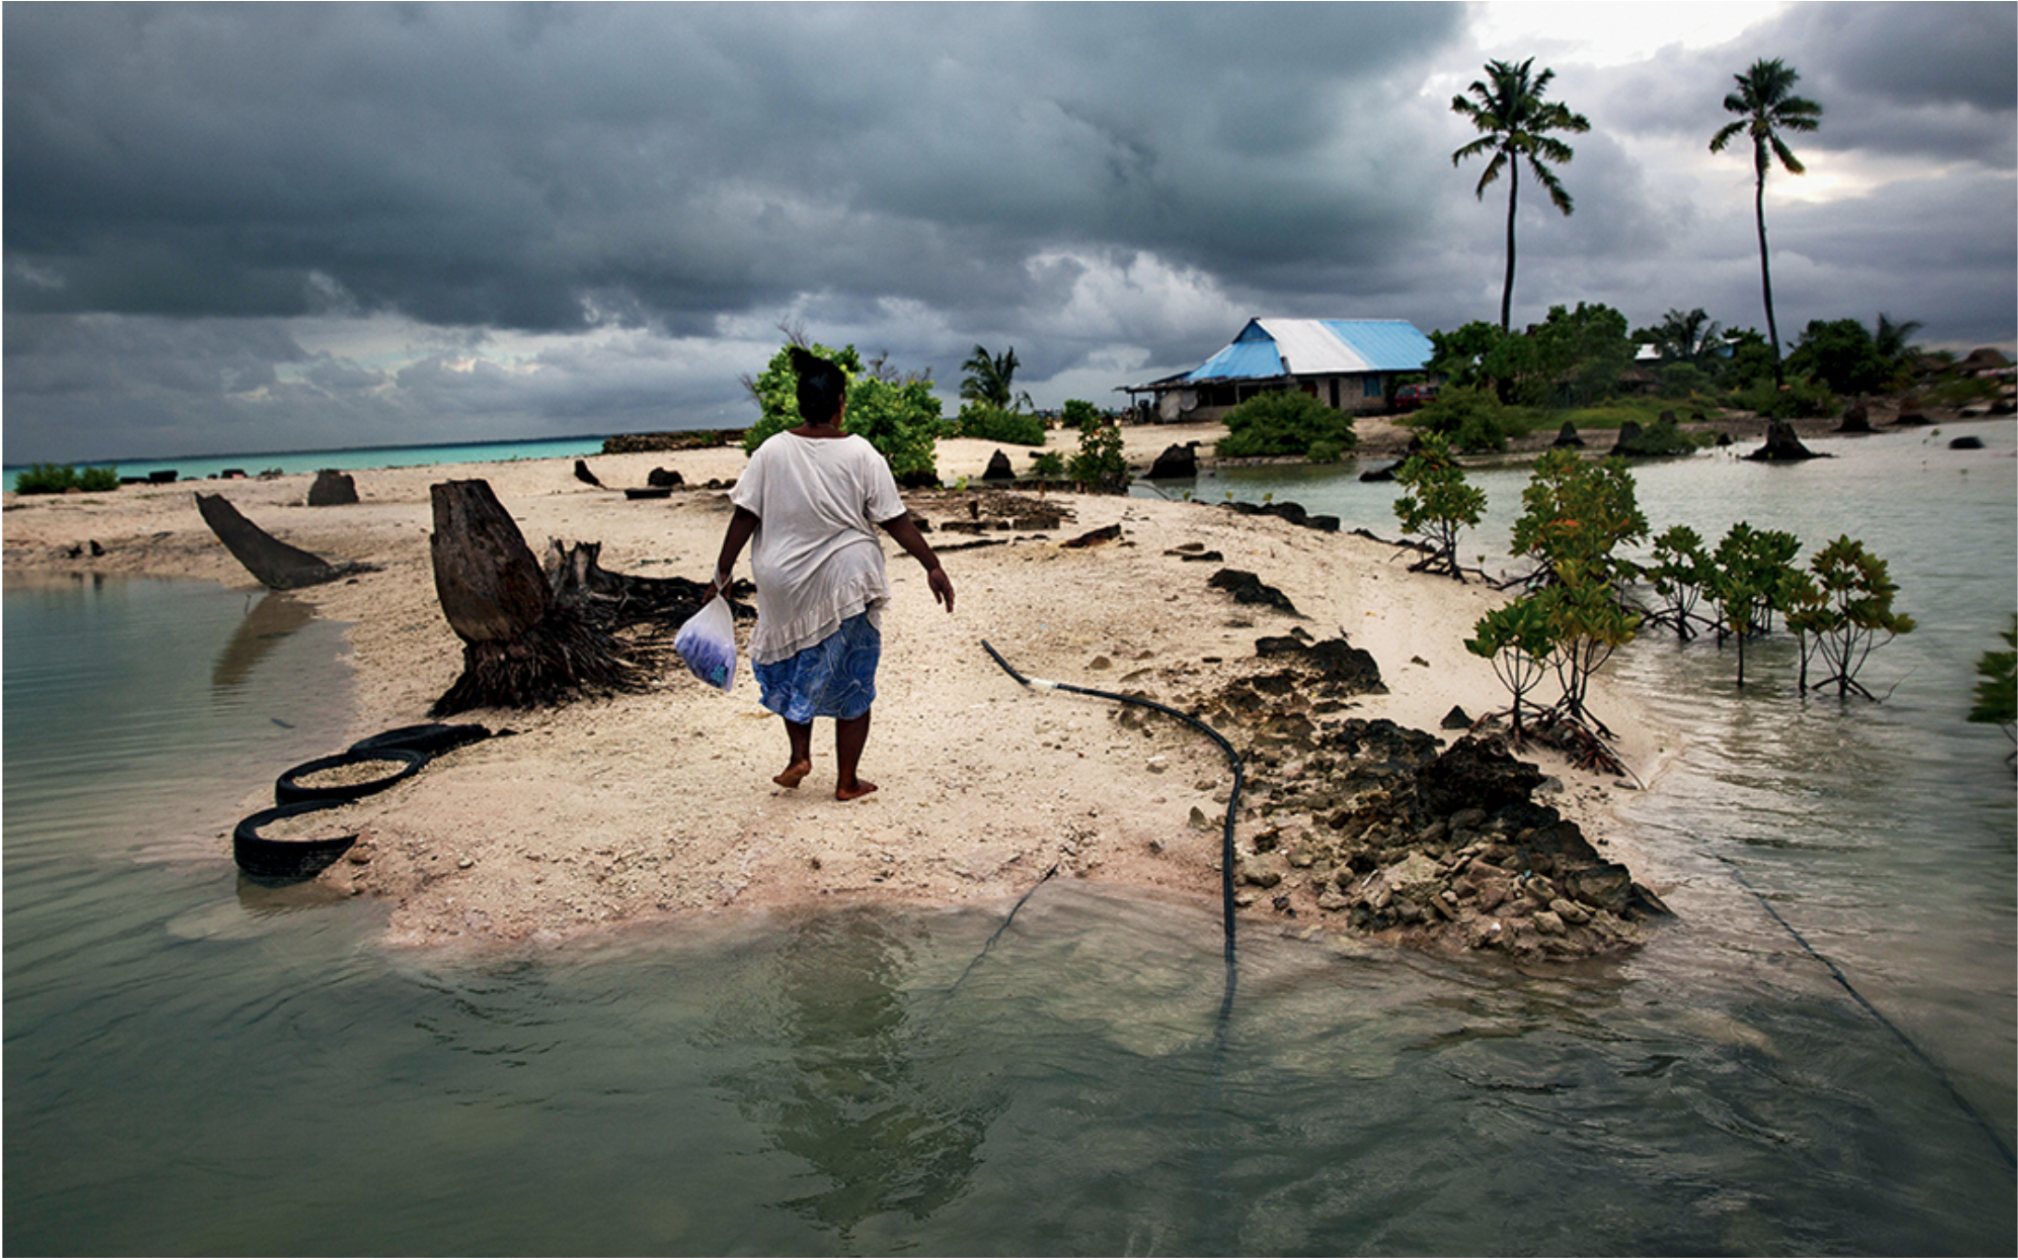 Staying Afloat: Developing Economies in the Age of Climate Change